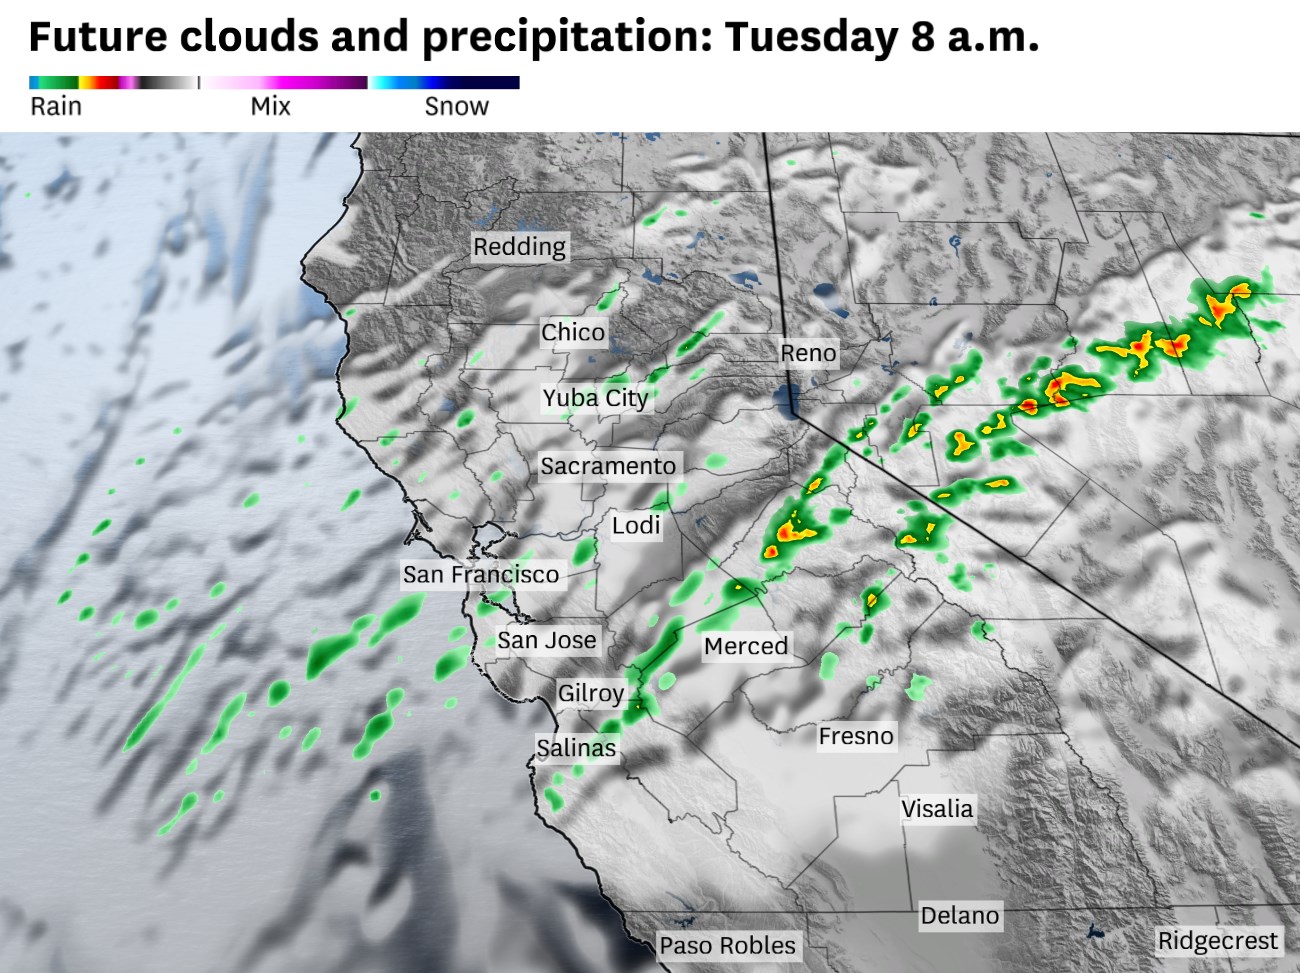 Thunderstorms and lightning strikes in Northern California reach their peak today